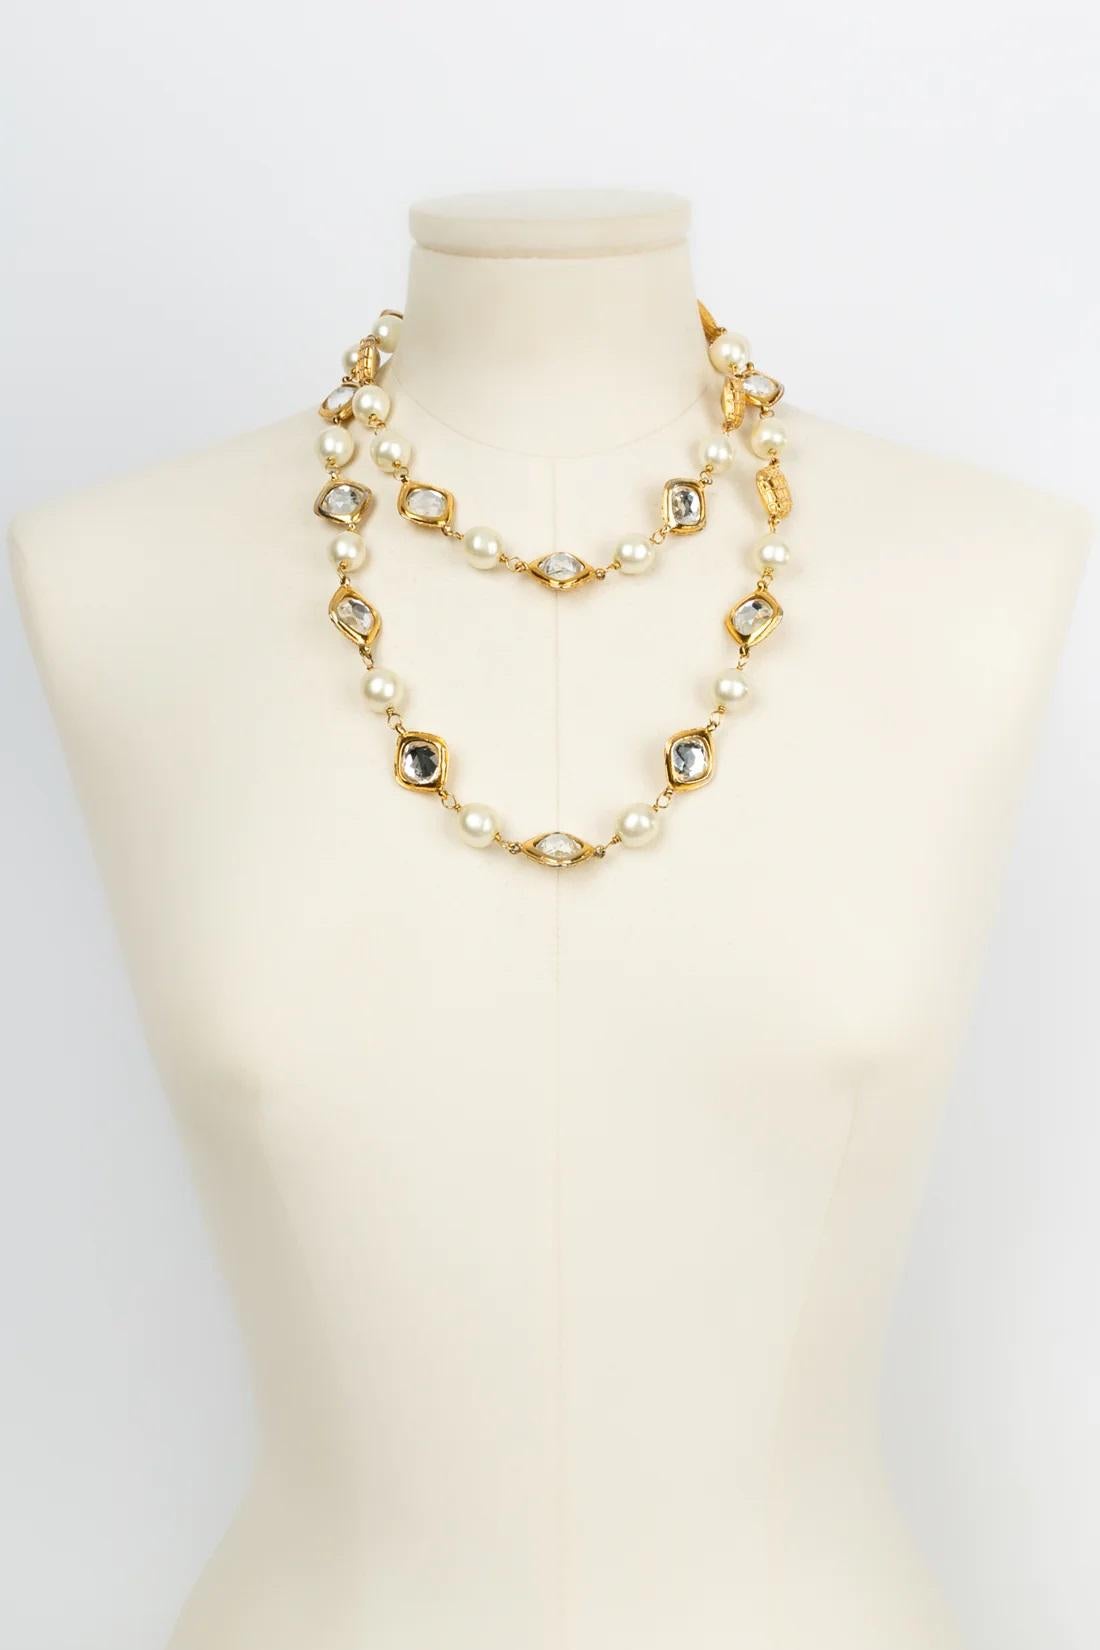 Chanel Beads and Rhinestones Necklace and Clip-on Earrings Set 11